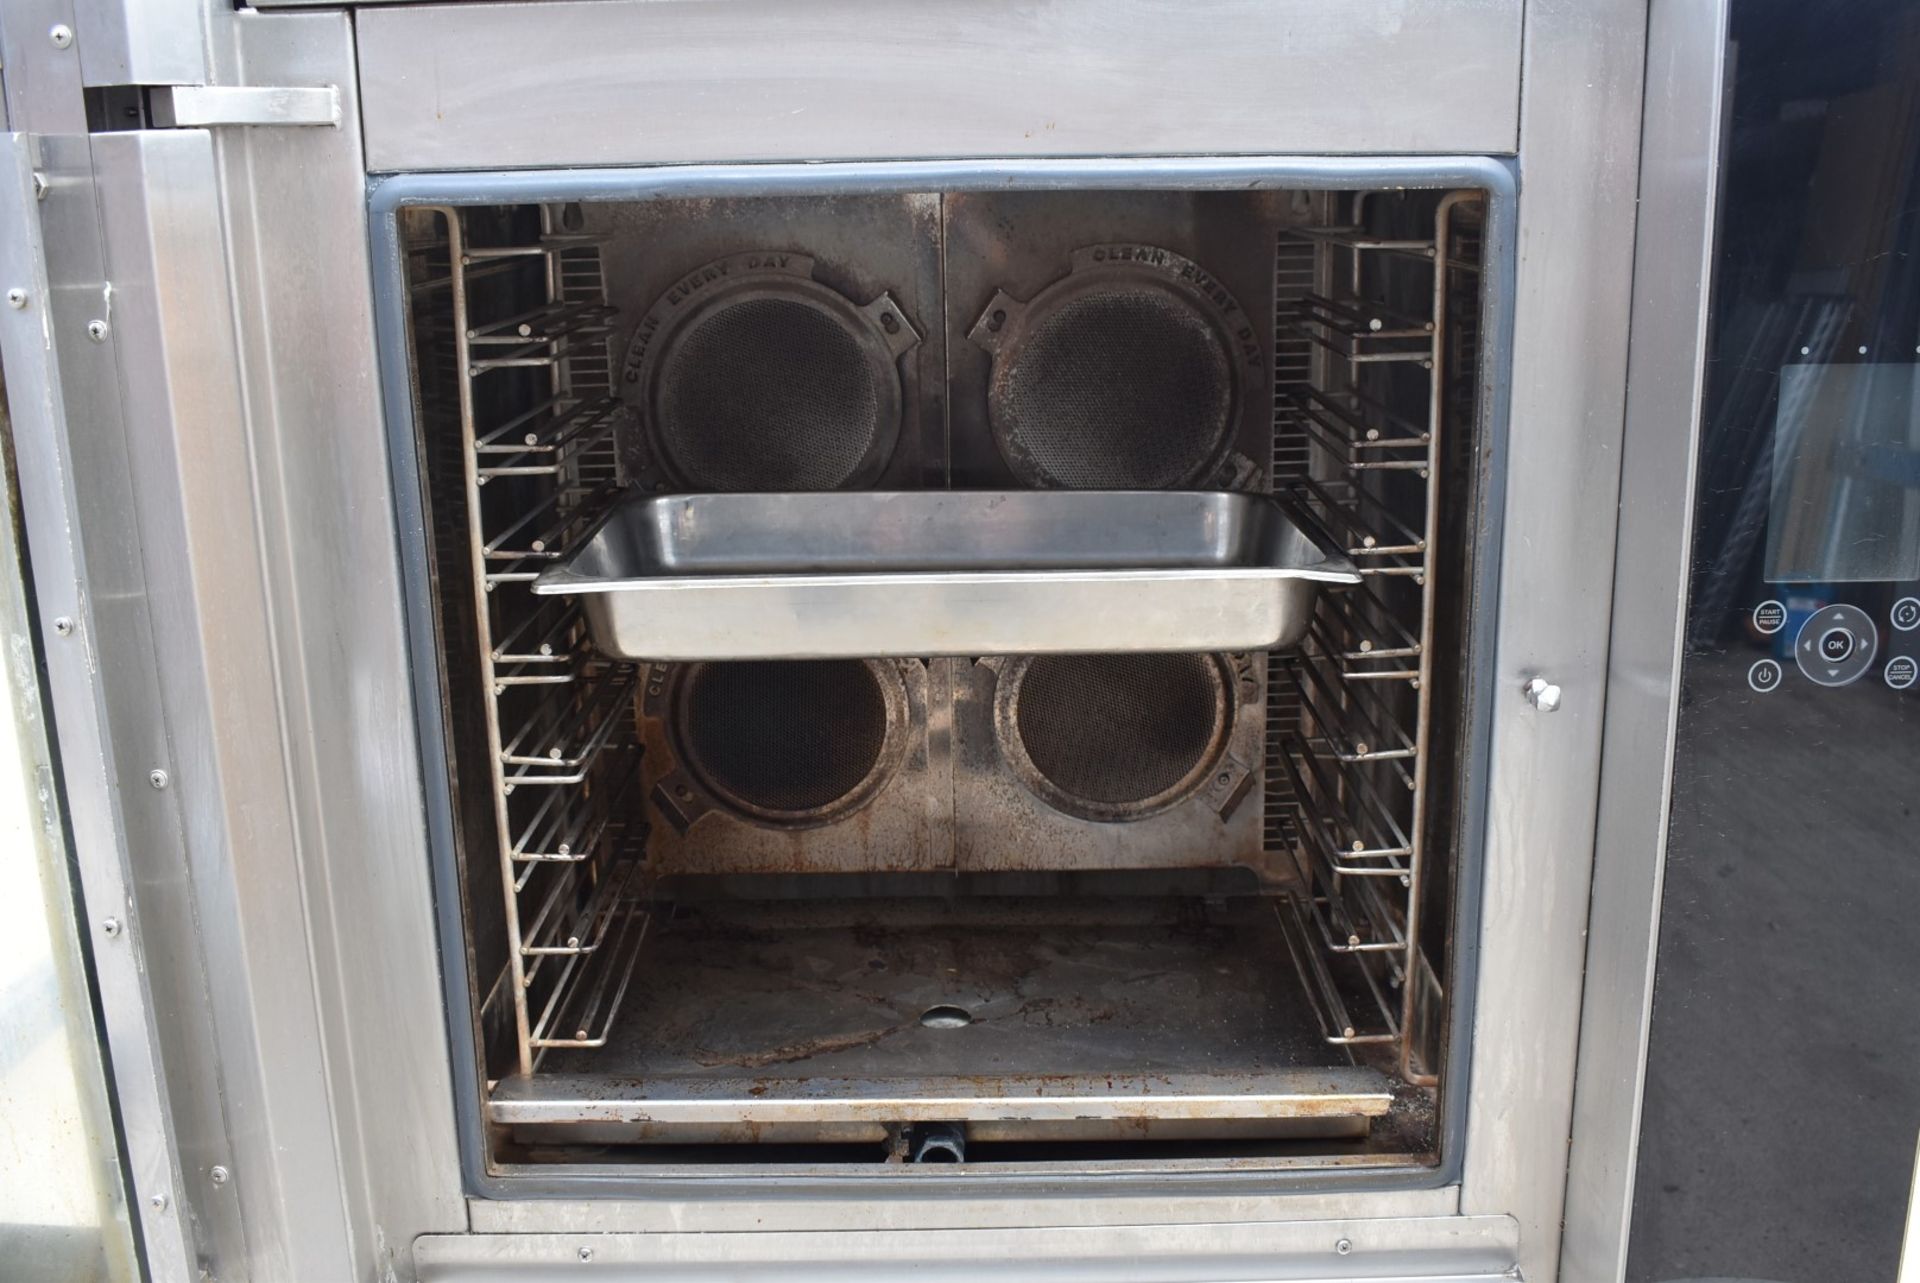 1 x Fri-Jado Turbo Retail 8 Grid Combi Oven - 3 Phase Combi Oven With Various Cooking Programs - Image 24 of 24